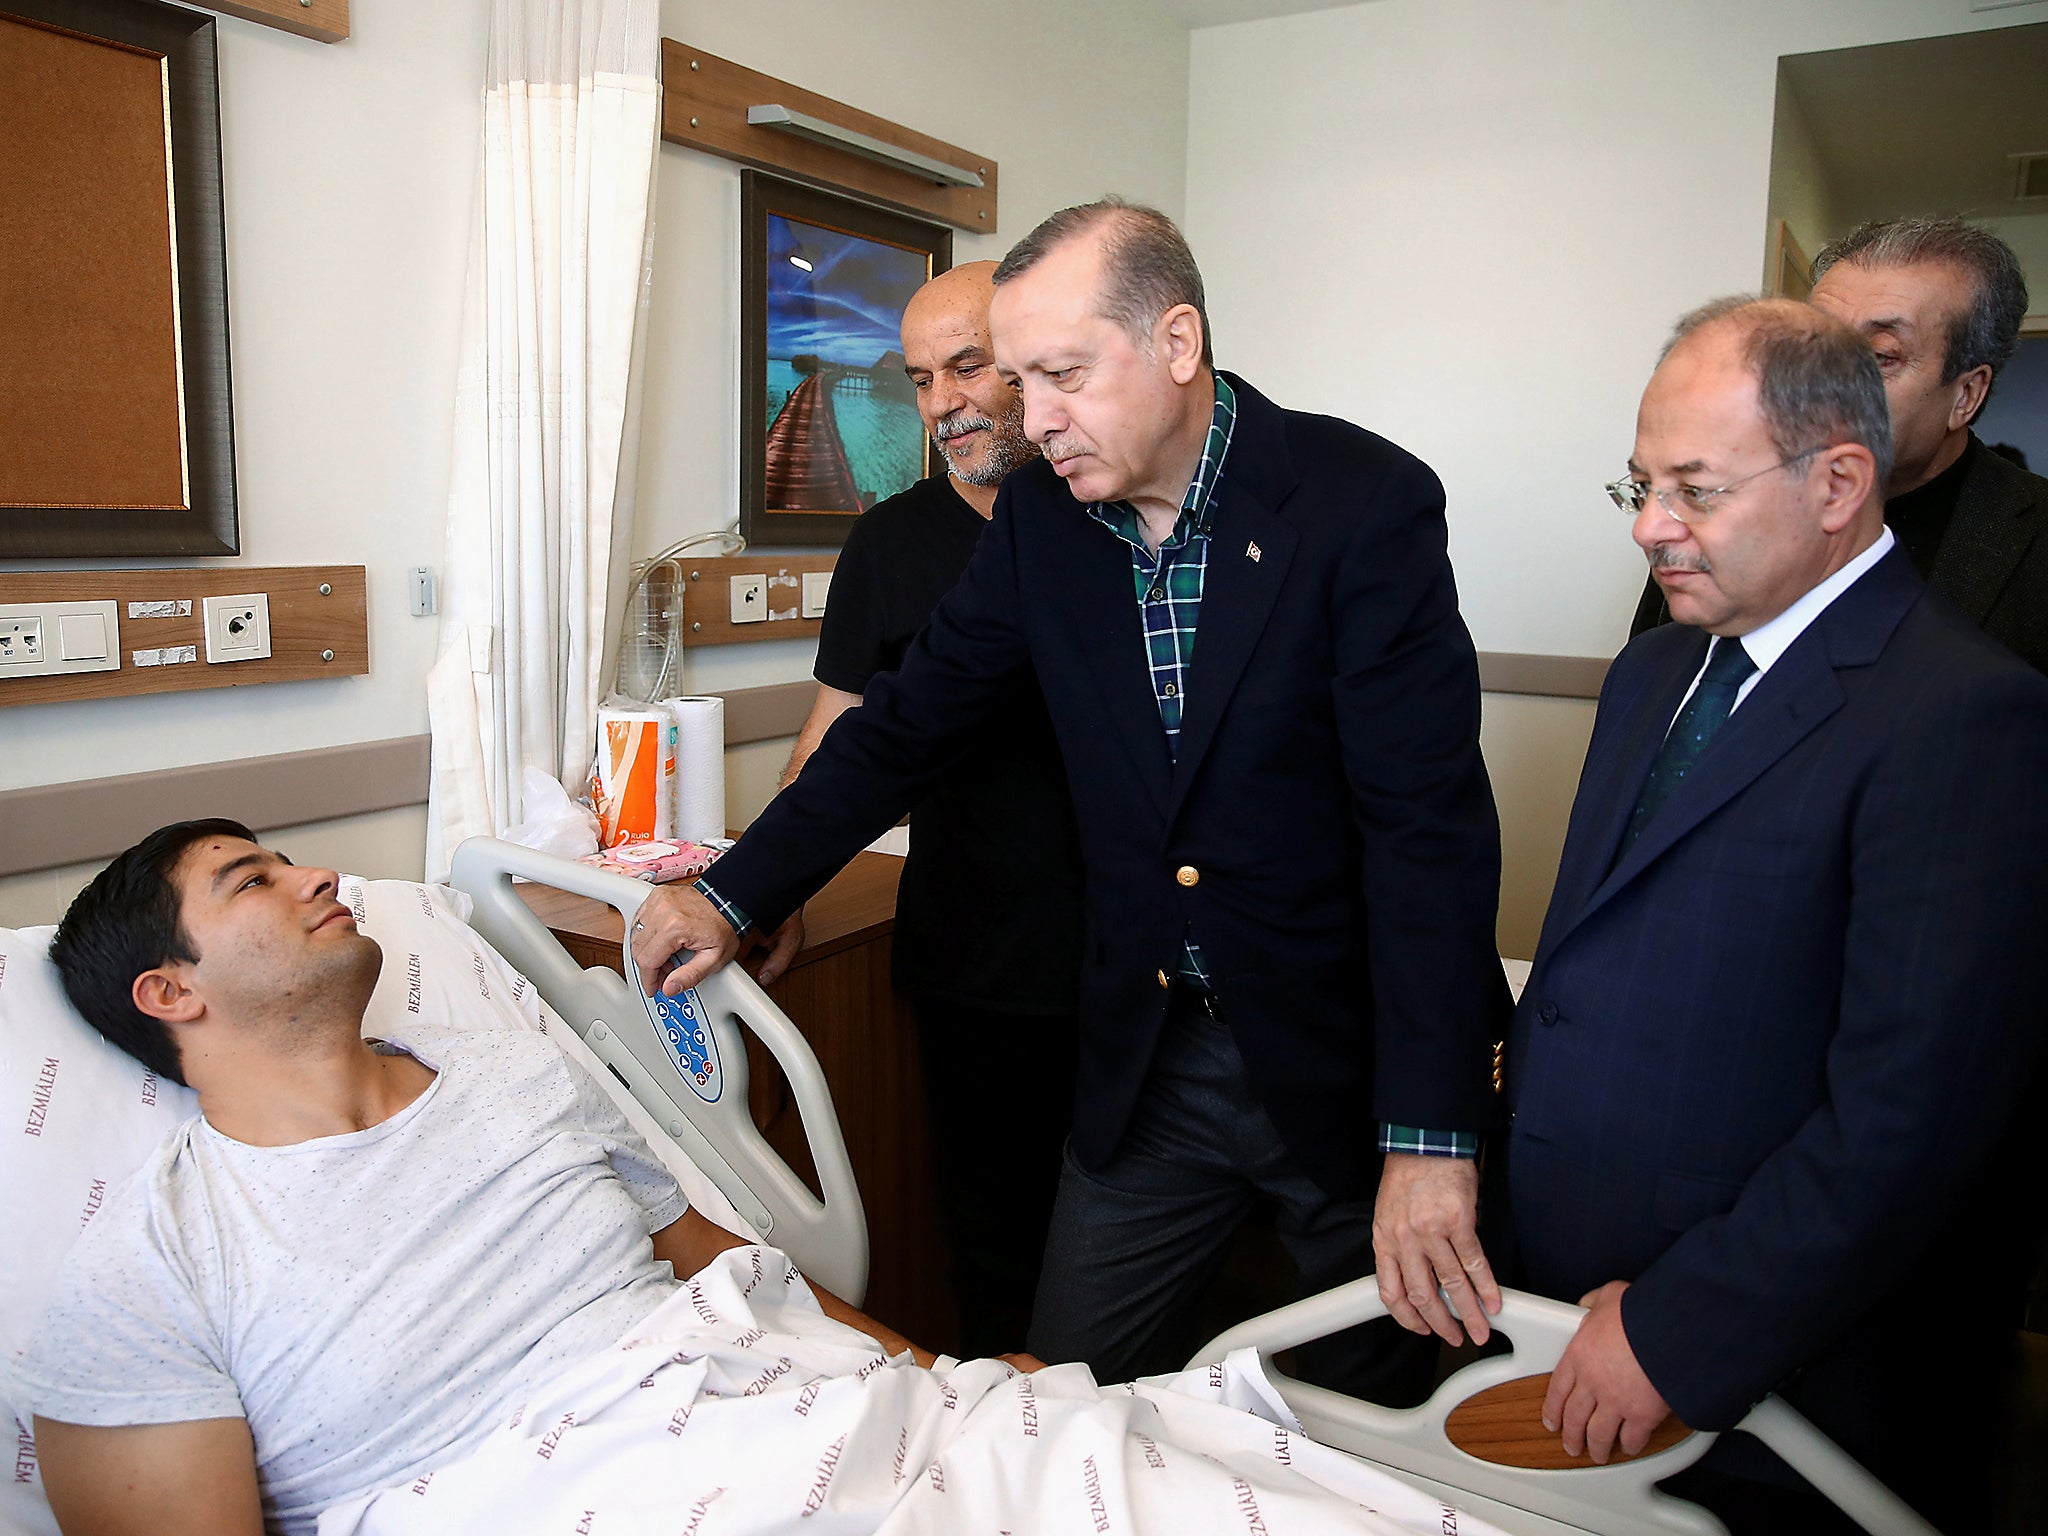 Turkish President Tayyip Erdogan visits a police officer who was injured in Saturday's blasts in a hospital in Istanbul, Turkey